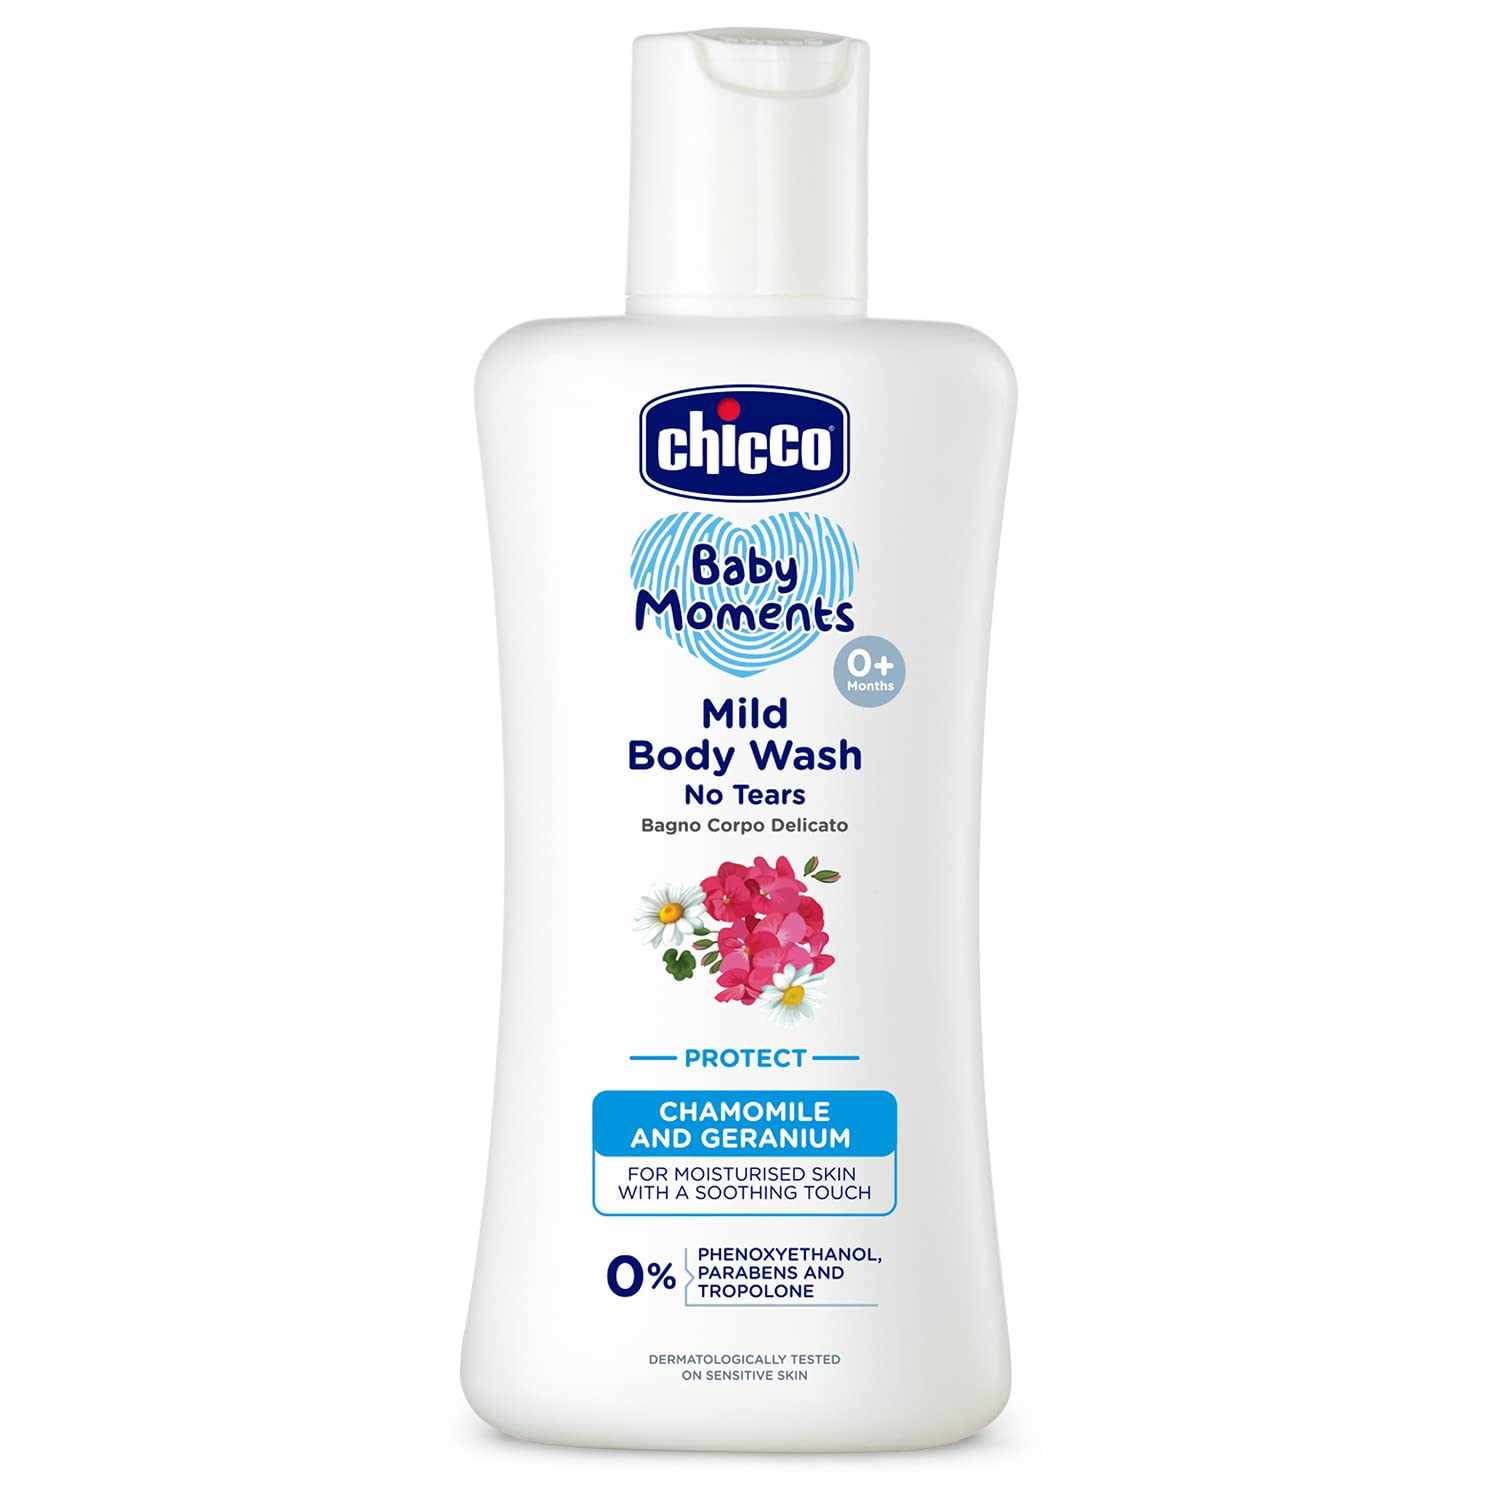 Chicco Baby Moments Mild Body Wash Protect, New Advanced formula with Natural Ingredients, No tears, Suitable for Baby’s Body Wash,